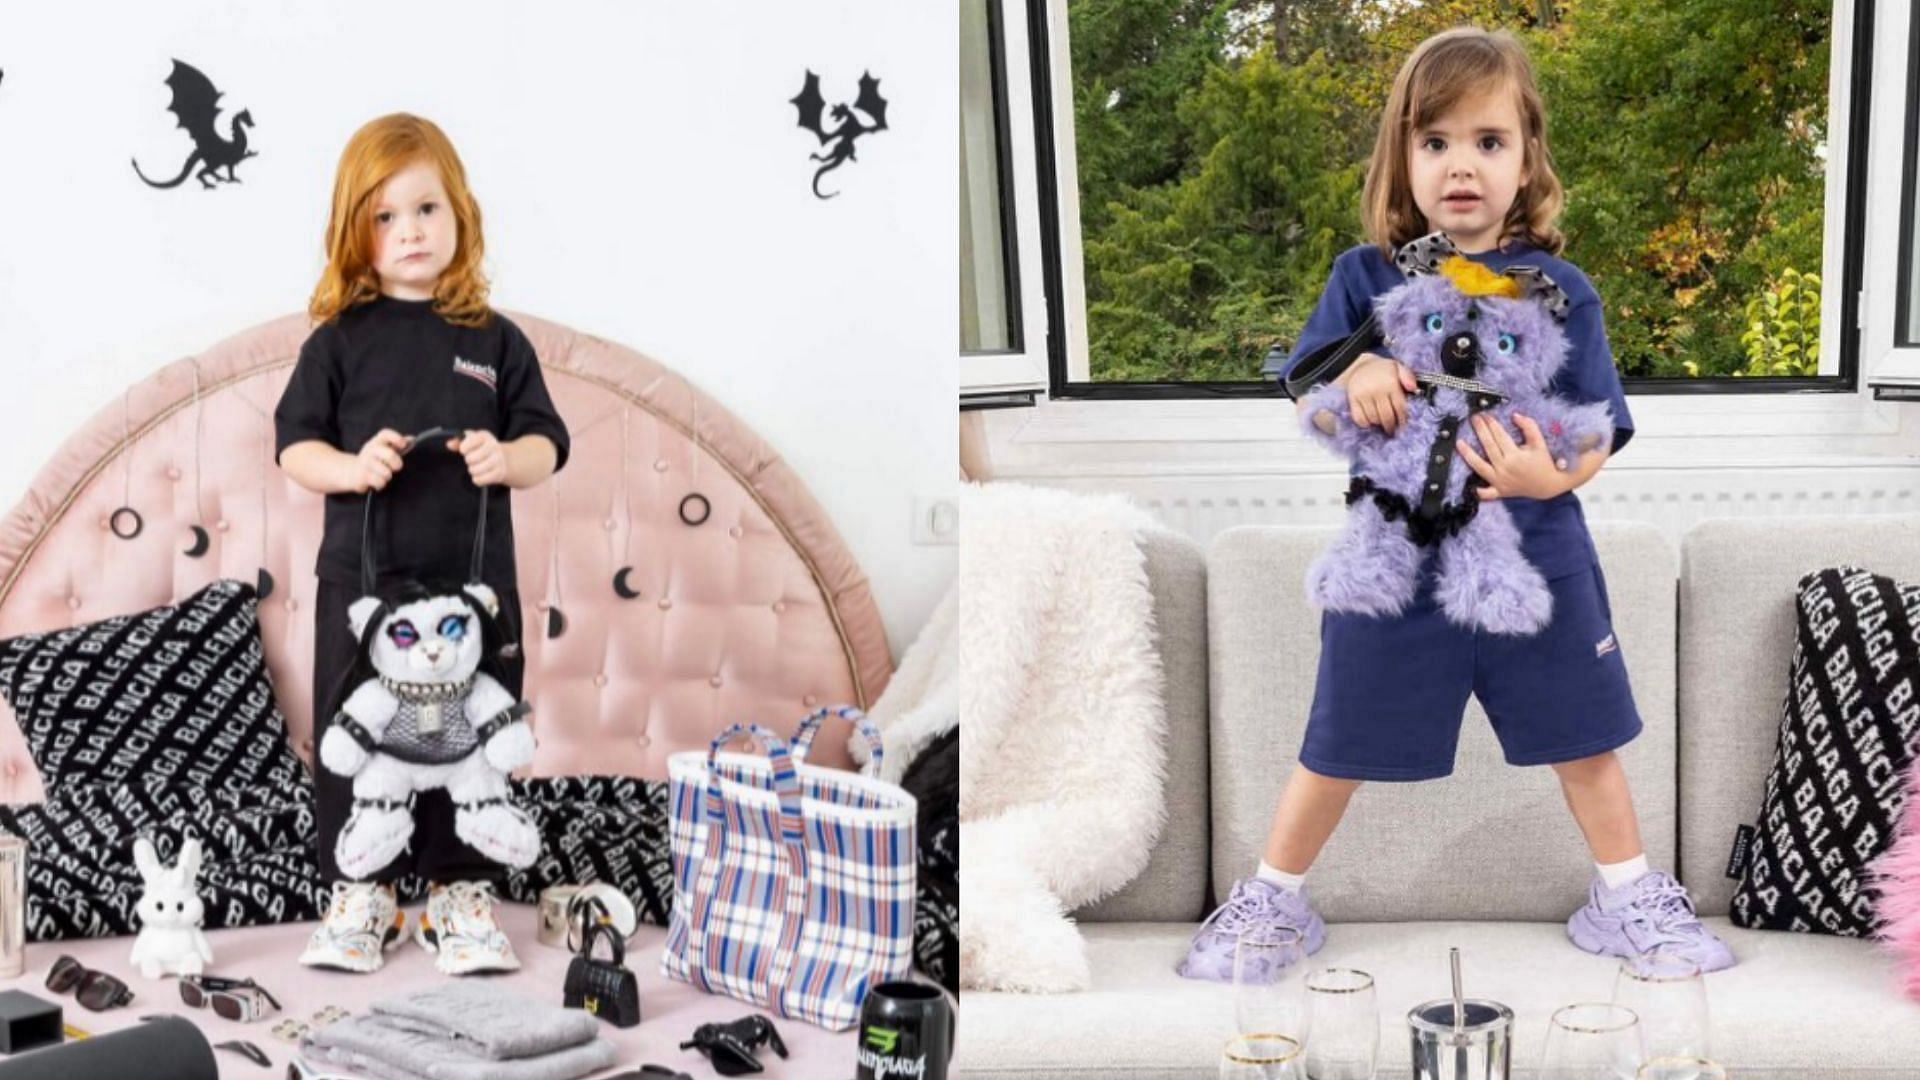 The fashion house&#039;s advertisement featuring children holding teddy bears dressed in bondage gear (Image via DatCatDer/Twitter)